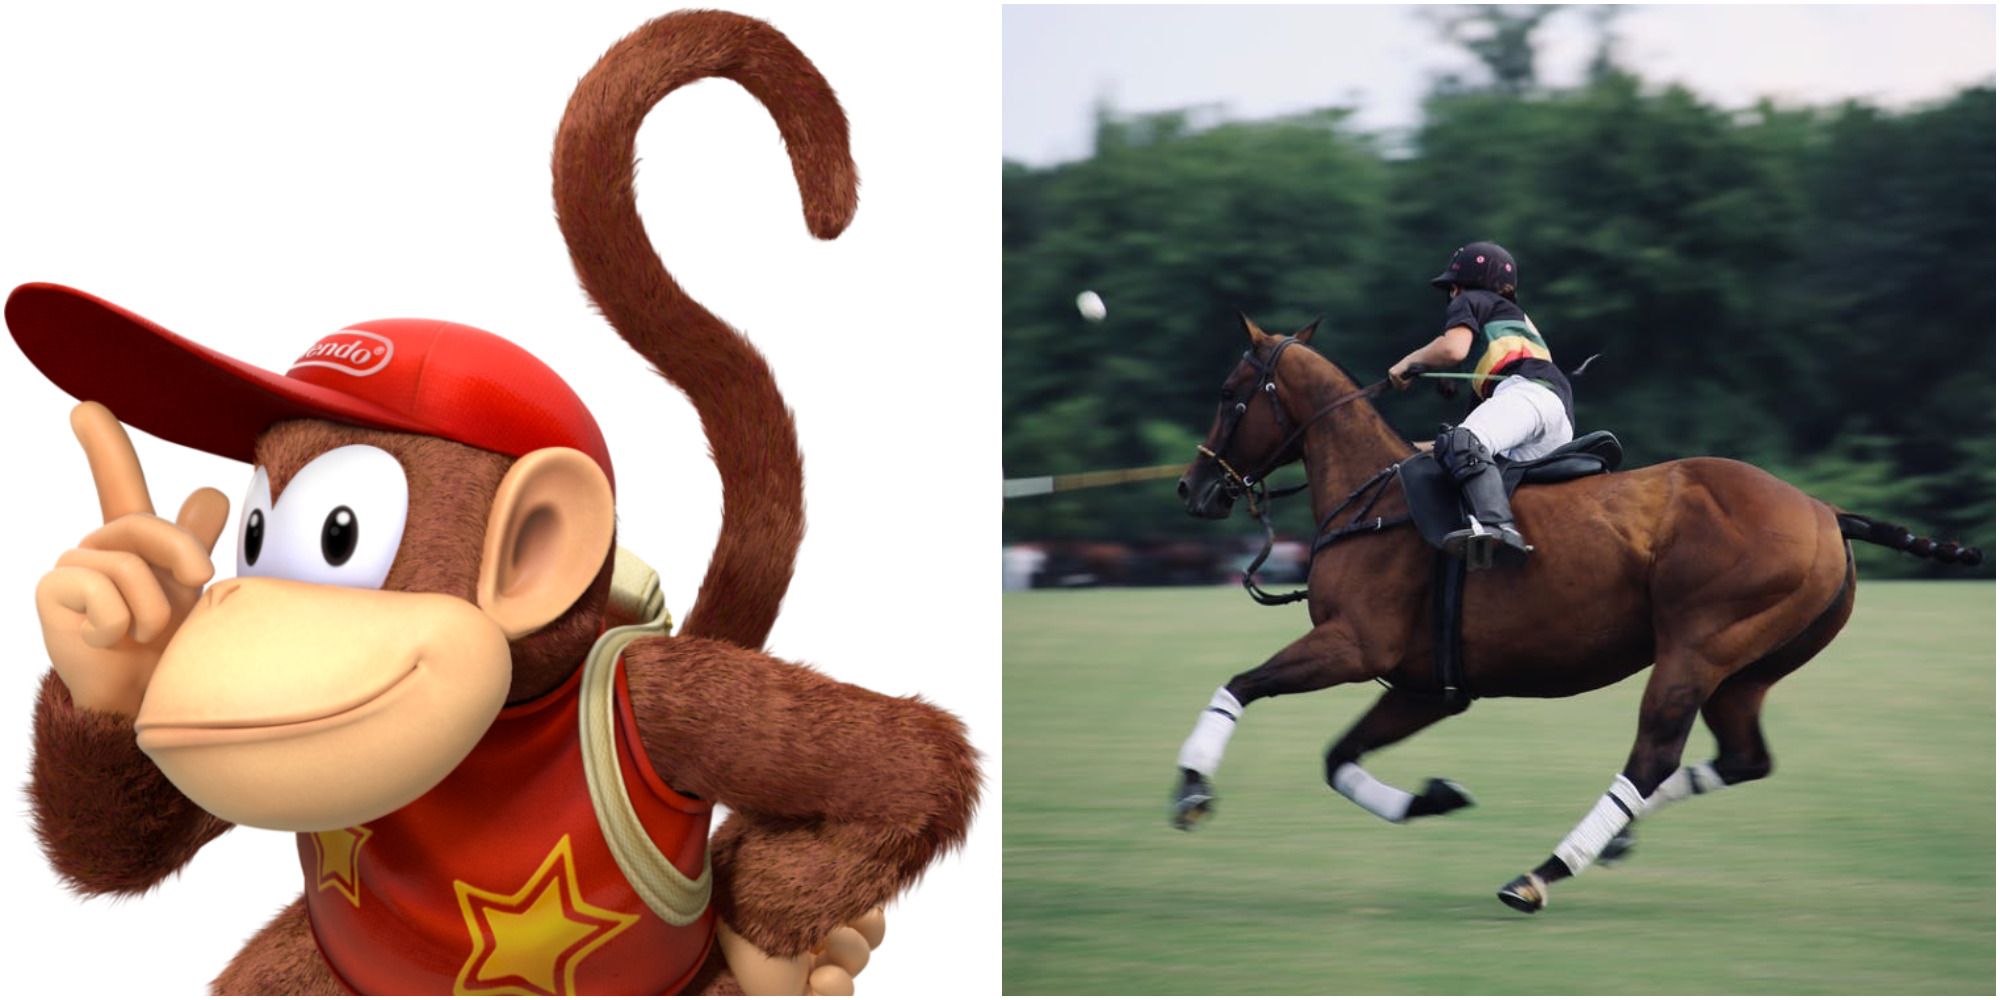 diddy kong polo